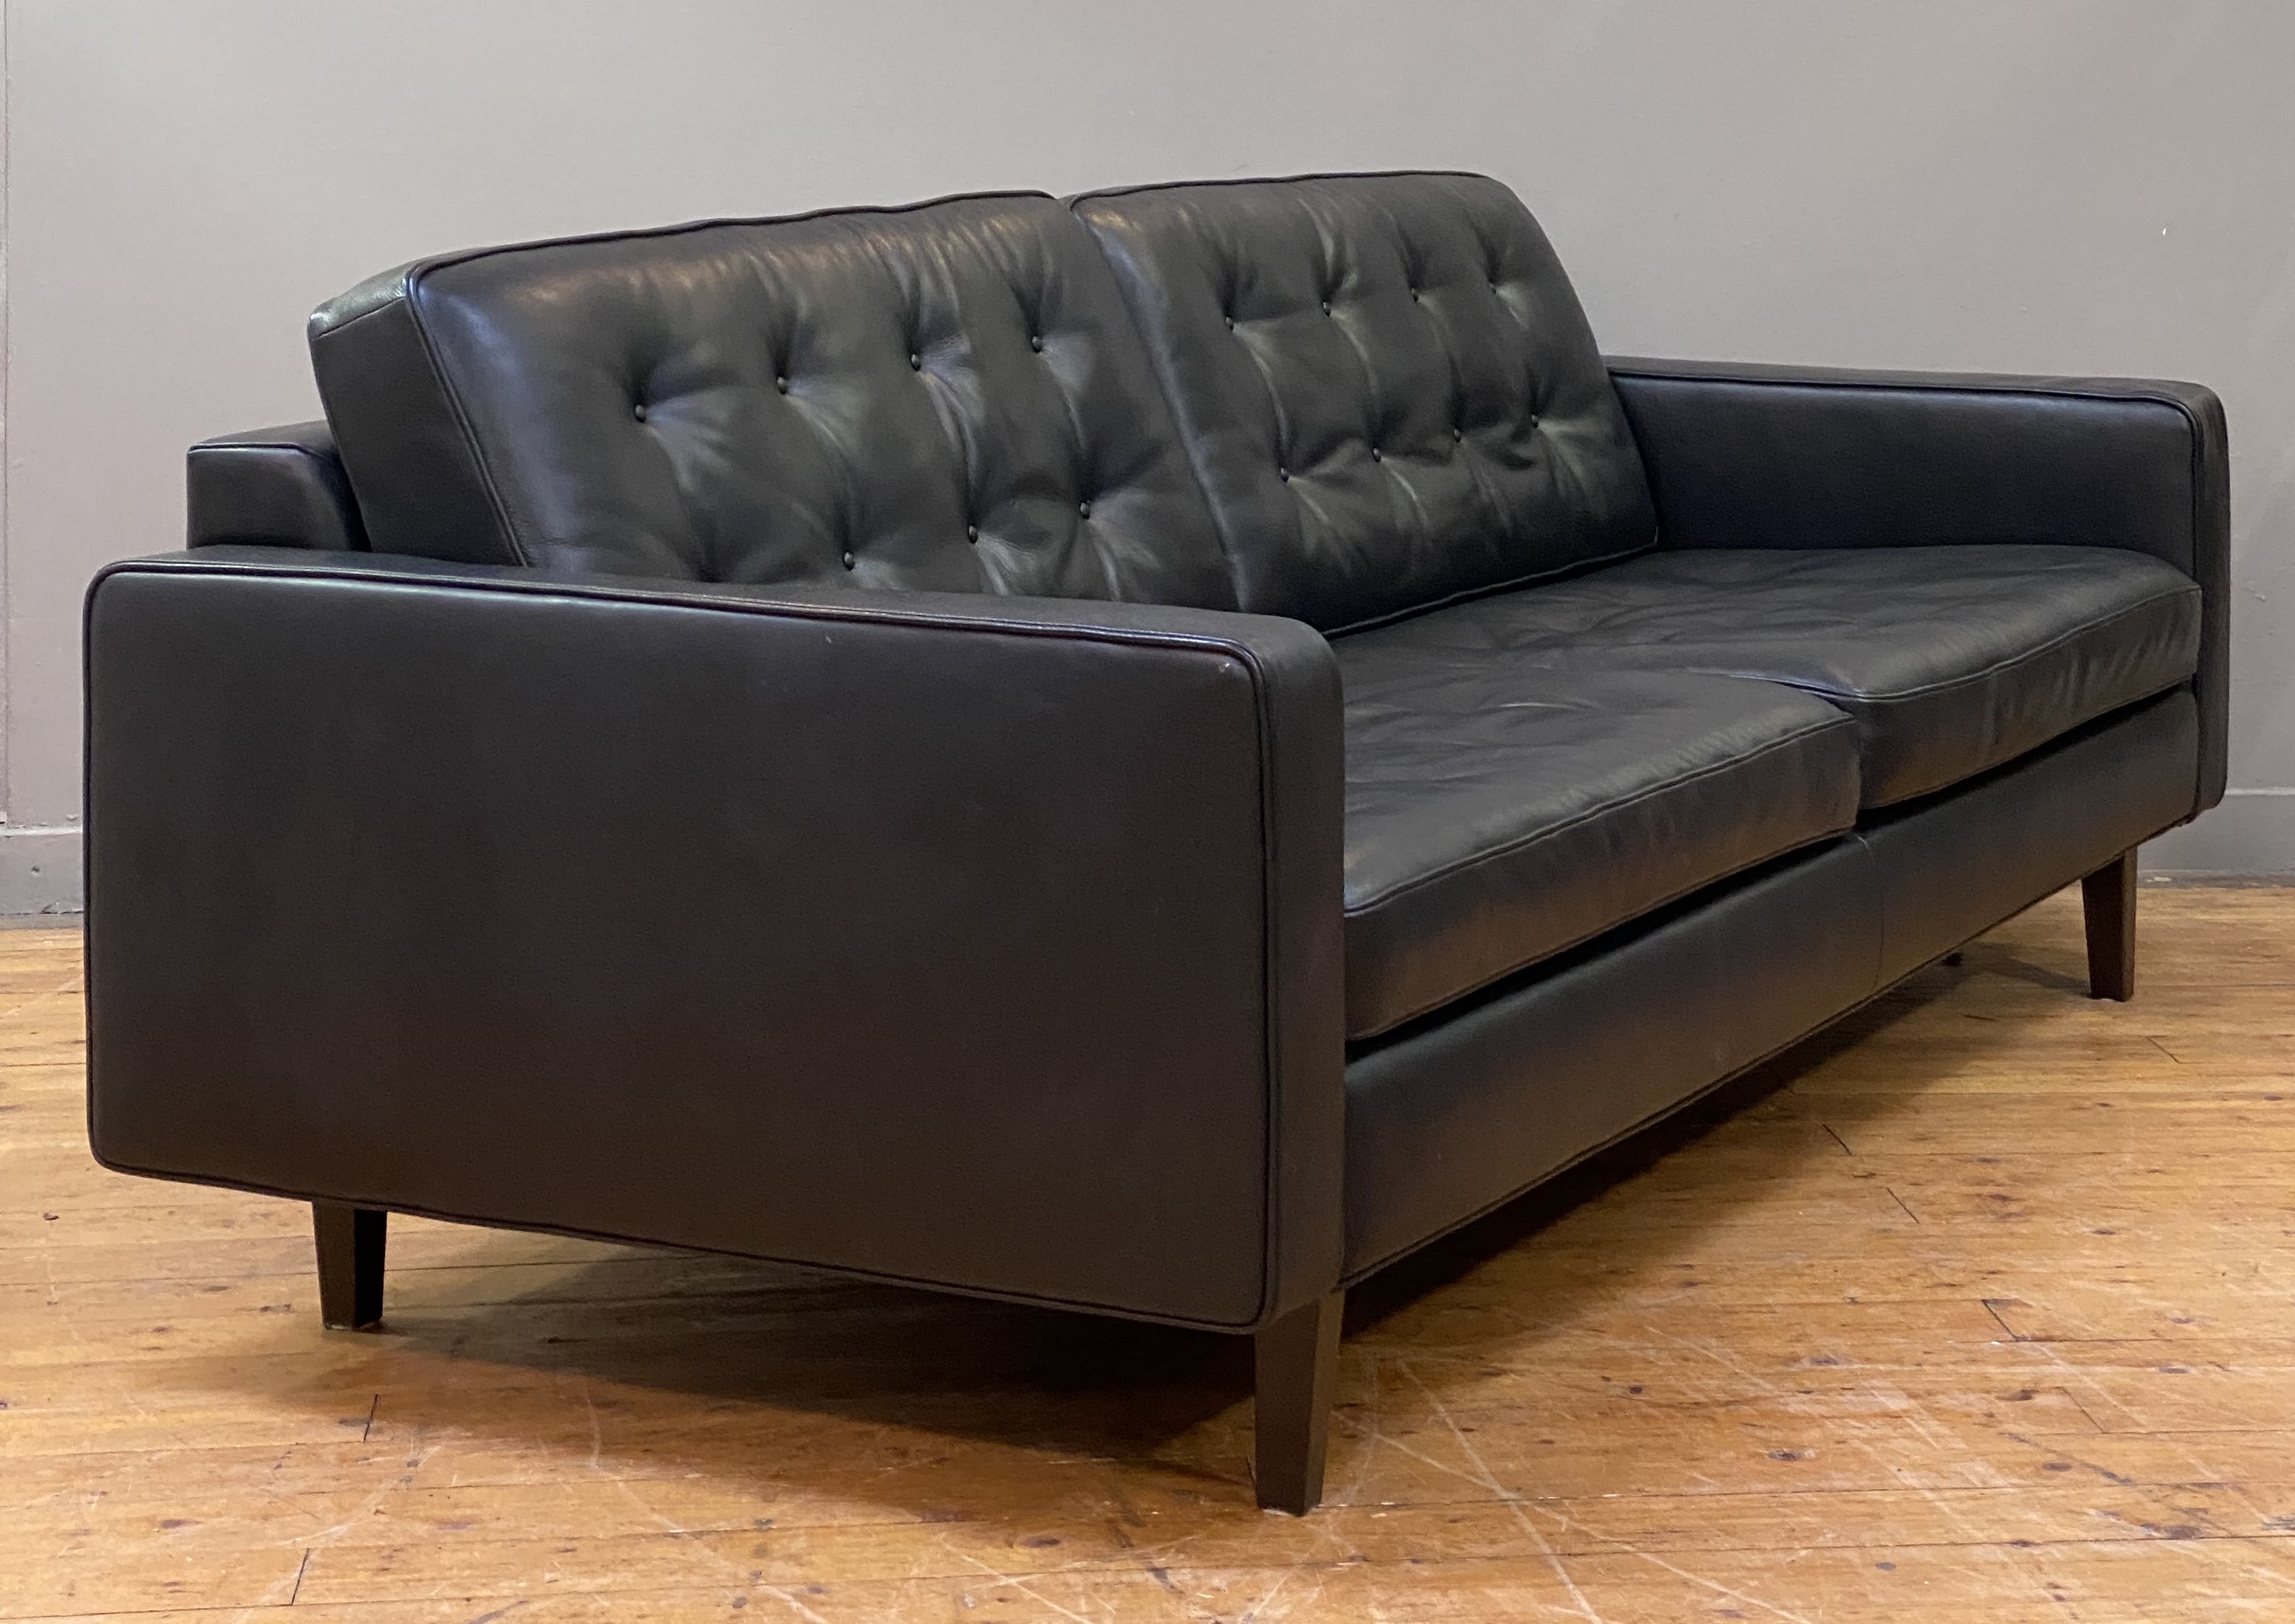 Heals, a contemporary sofa, upholstered in buttoned semi-aniline black leather and standing on